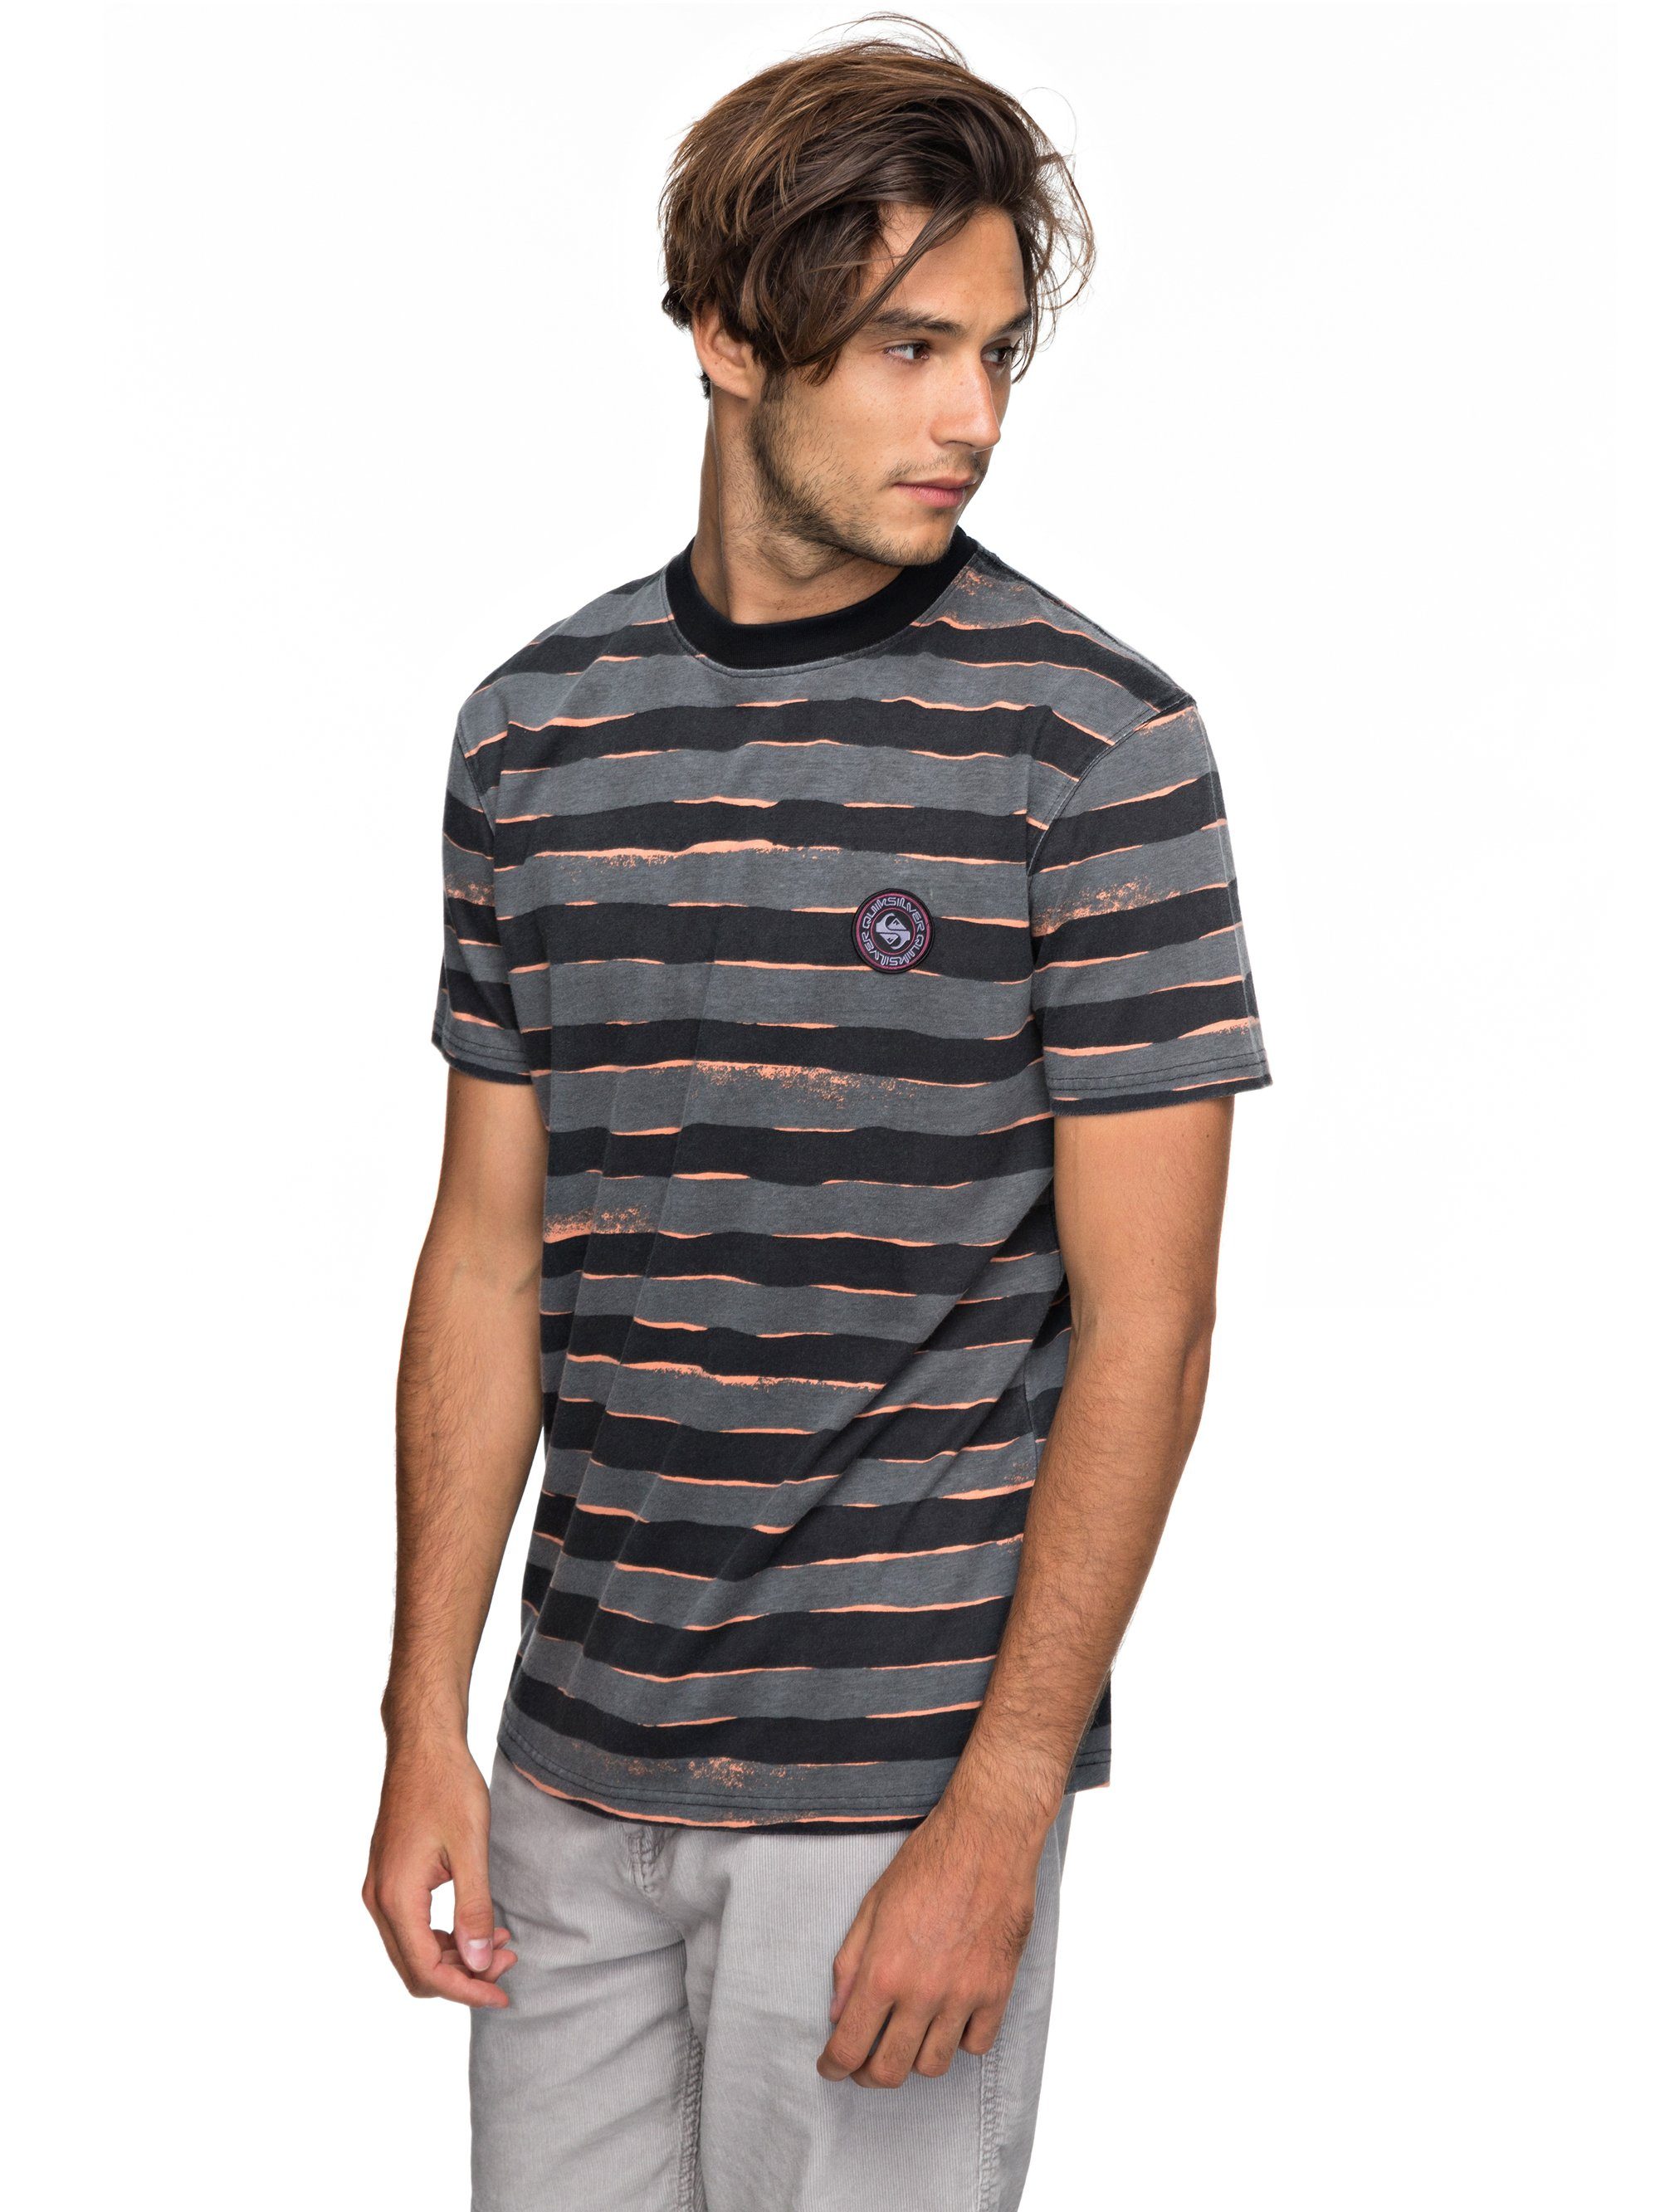 Otto - Quiksilver NU 15% KORTING: Quiksilver T-Shirt Allover Mad Wax